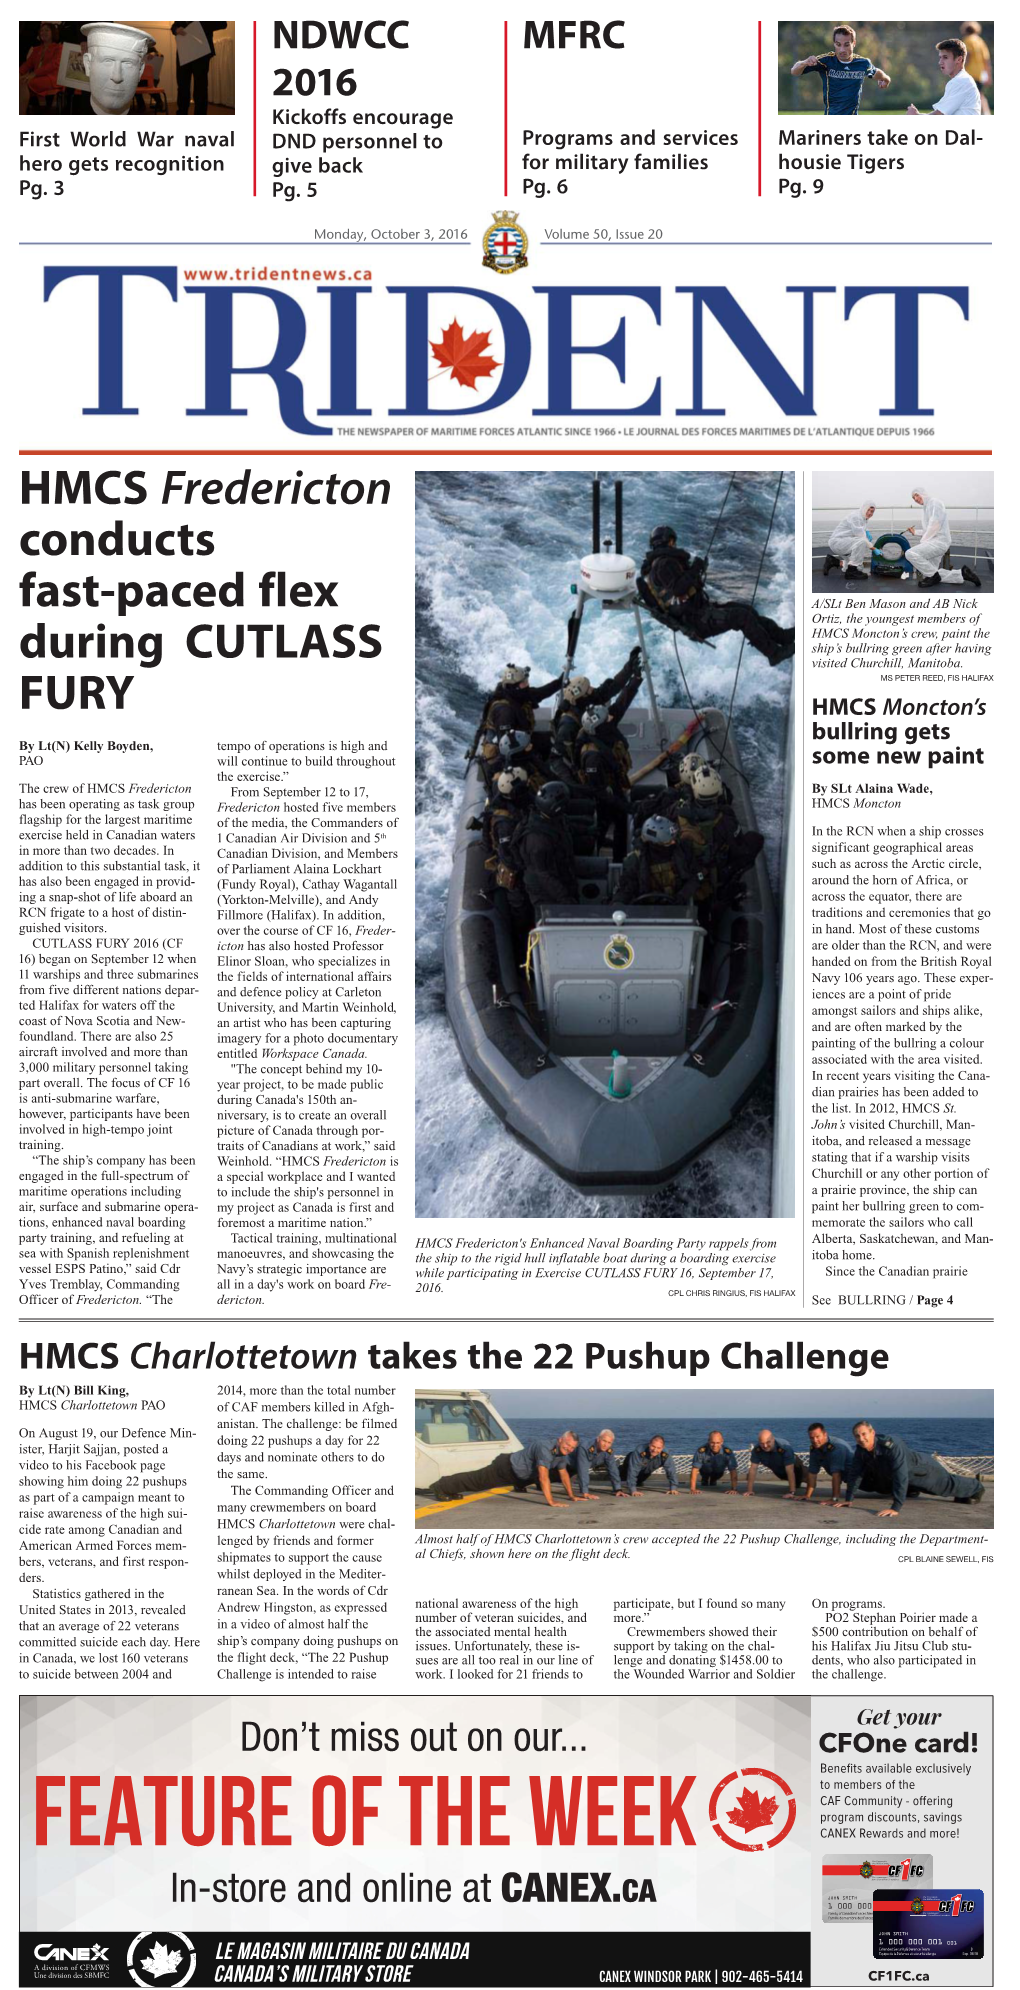 HMCS Fredericton Conducts Fast-Paced Flex During CUTLASS